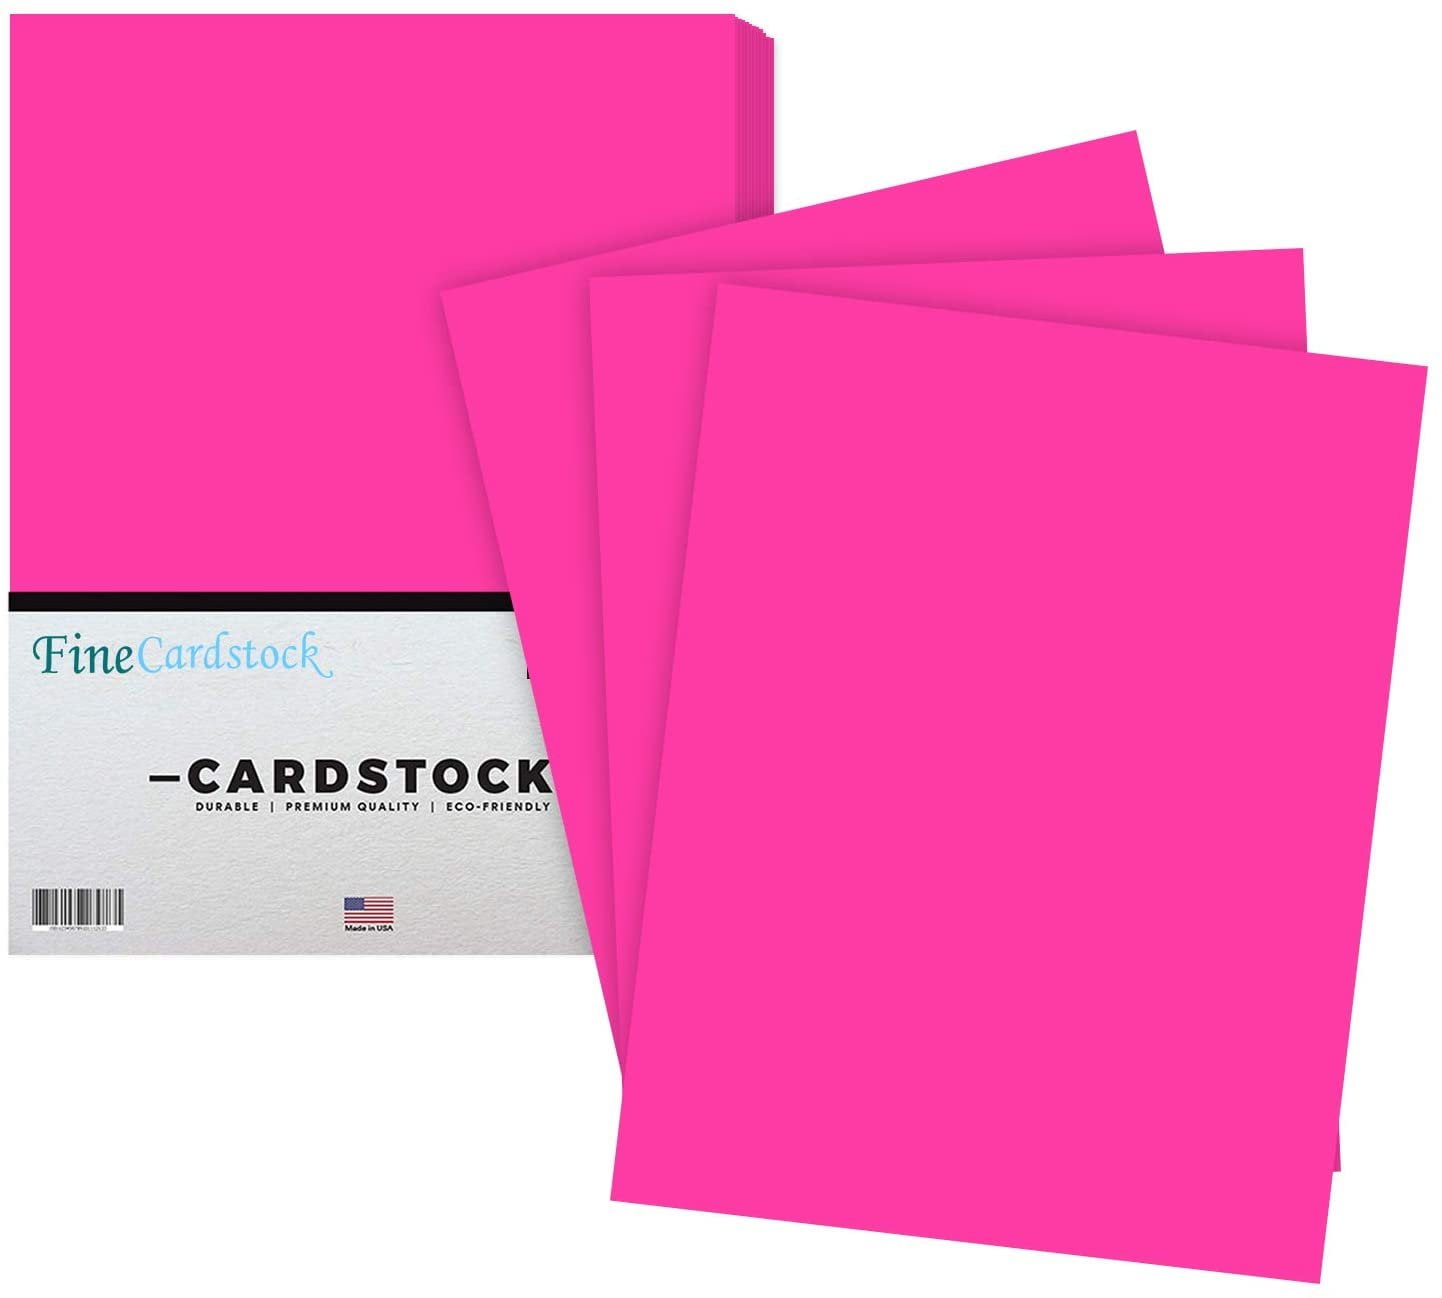 20 Sheets Candy Pink Cardstock 8.5 x 11, 250gsm/92lb Pink cardstock Paper  for DIY Arts Cards Making, Black Craft Paper for Invitations, Stationary